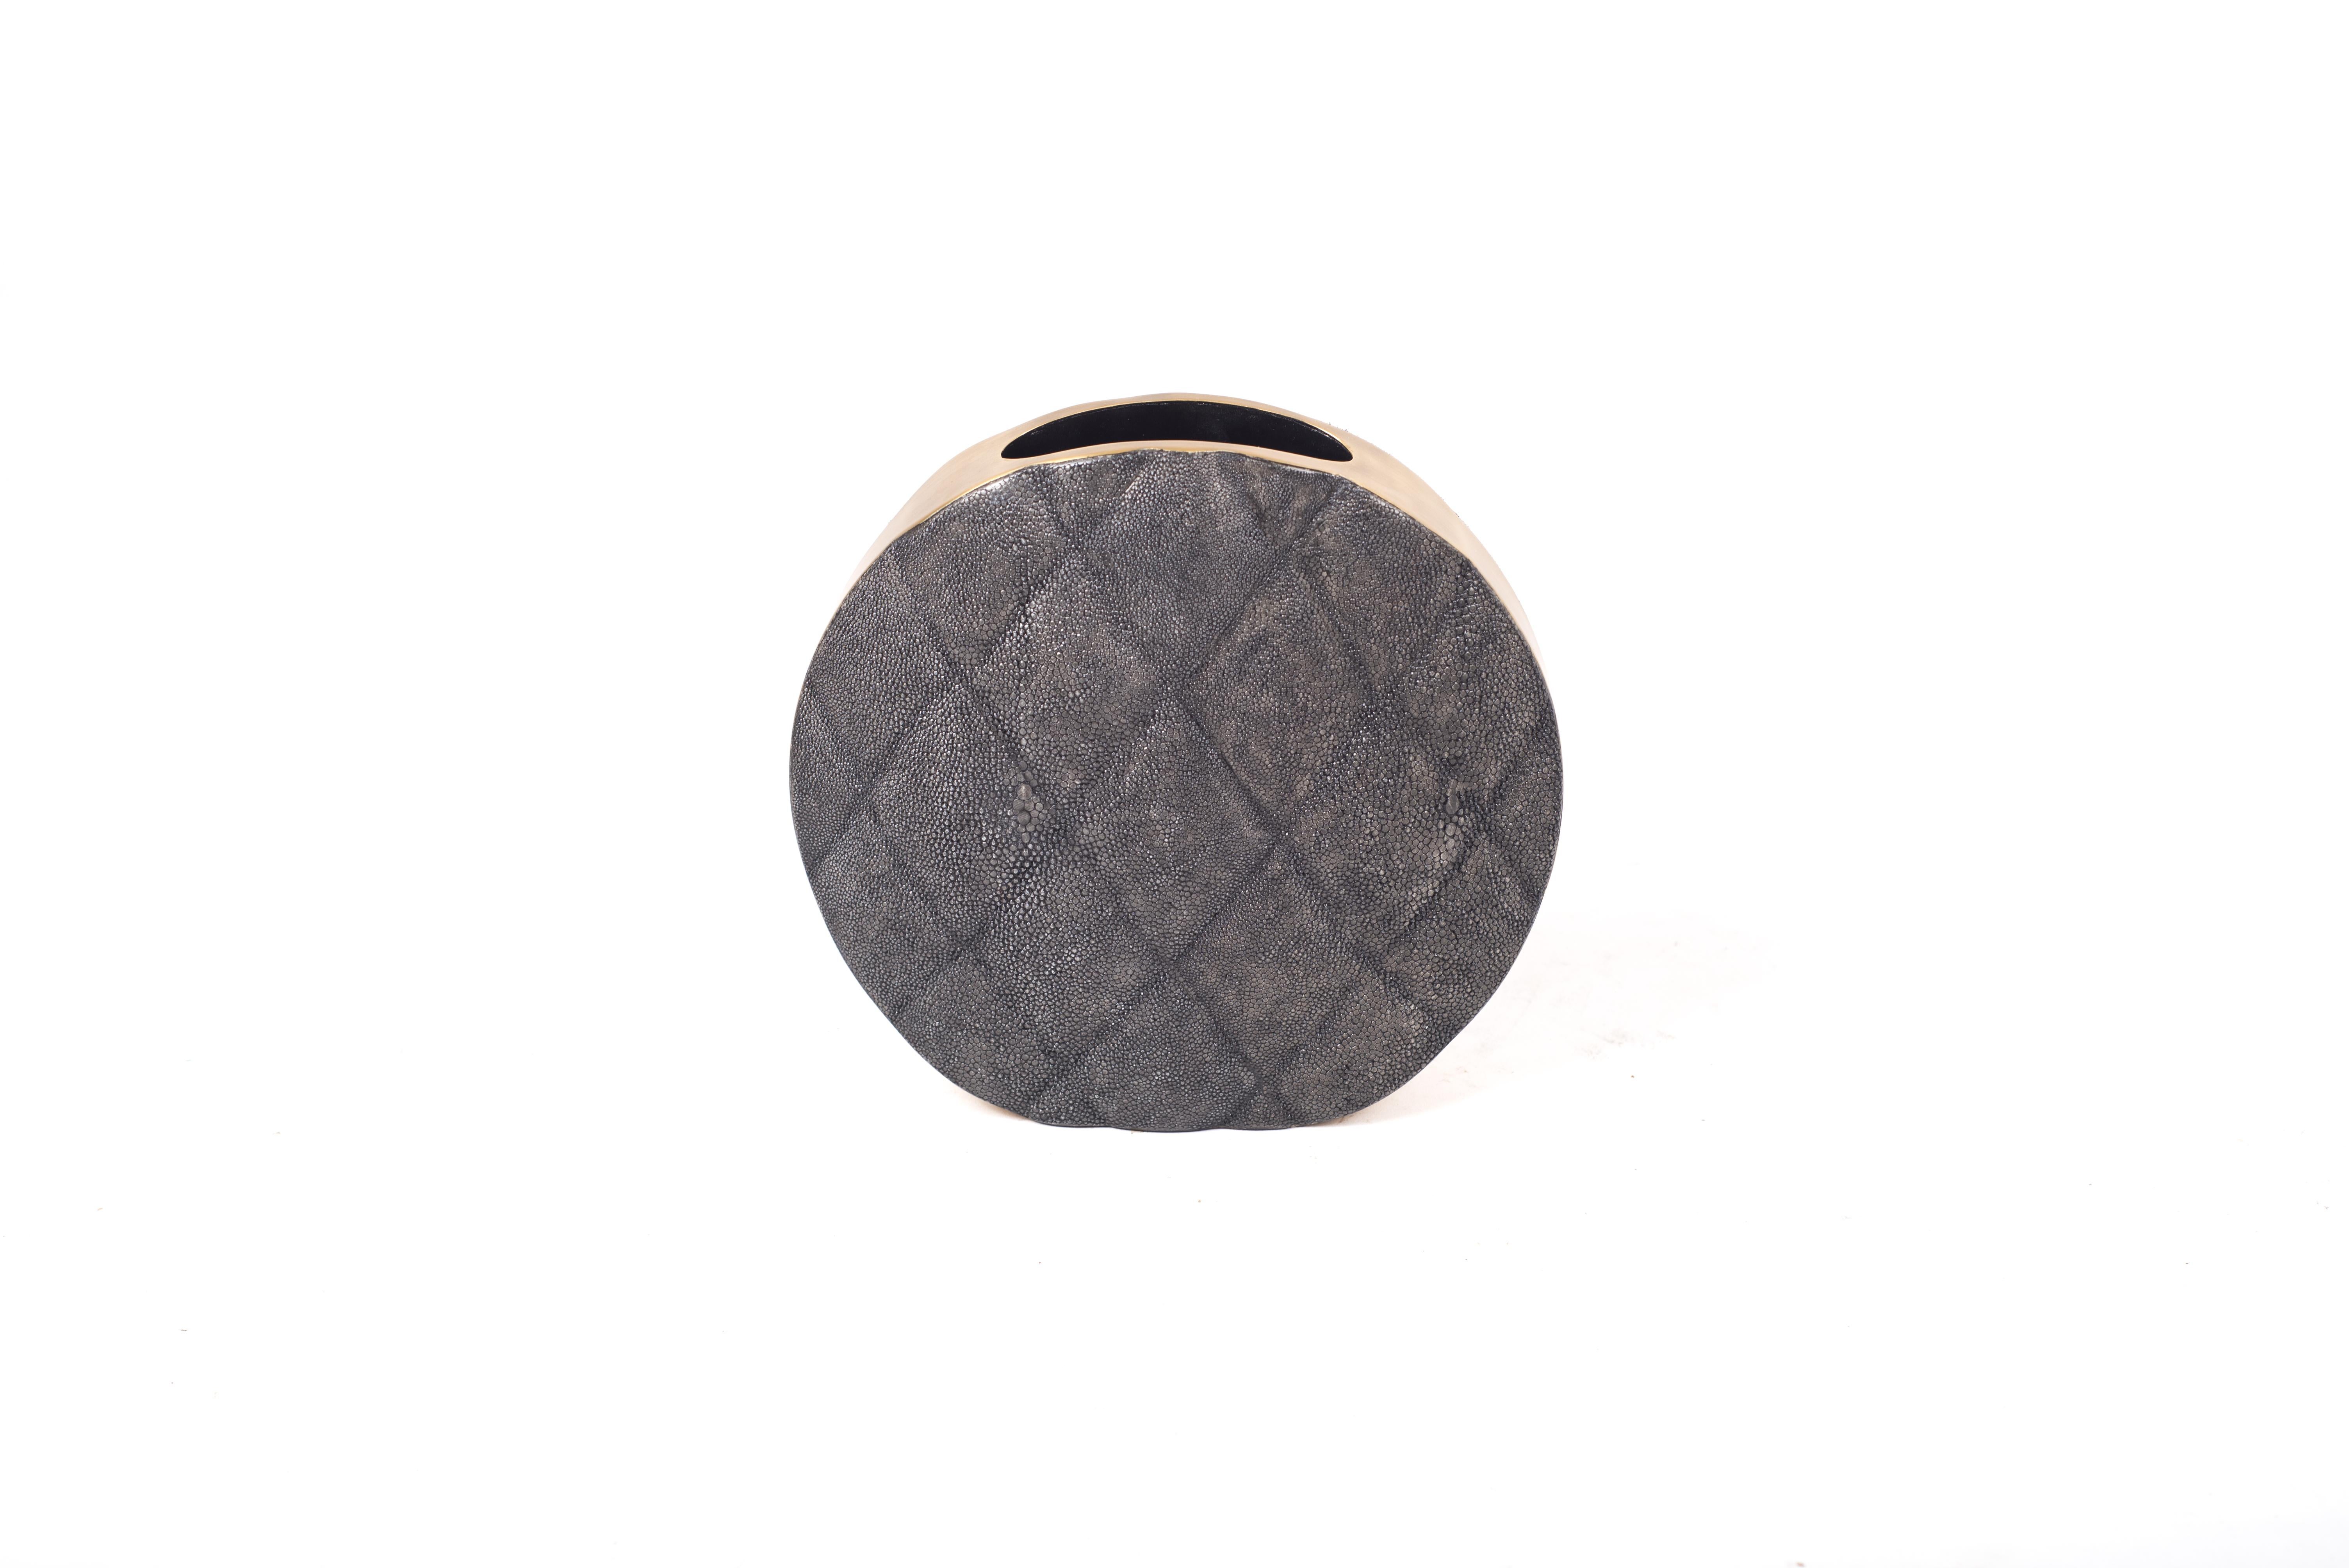 The Coco vase is an elegant piece with its exquisite quilted detailing. This listing is for the medium size inlaid in coal black shagreen with brass details on the side frame. All our vases are inlaid with a fiber-glass interior to support